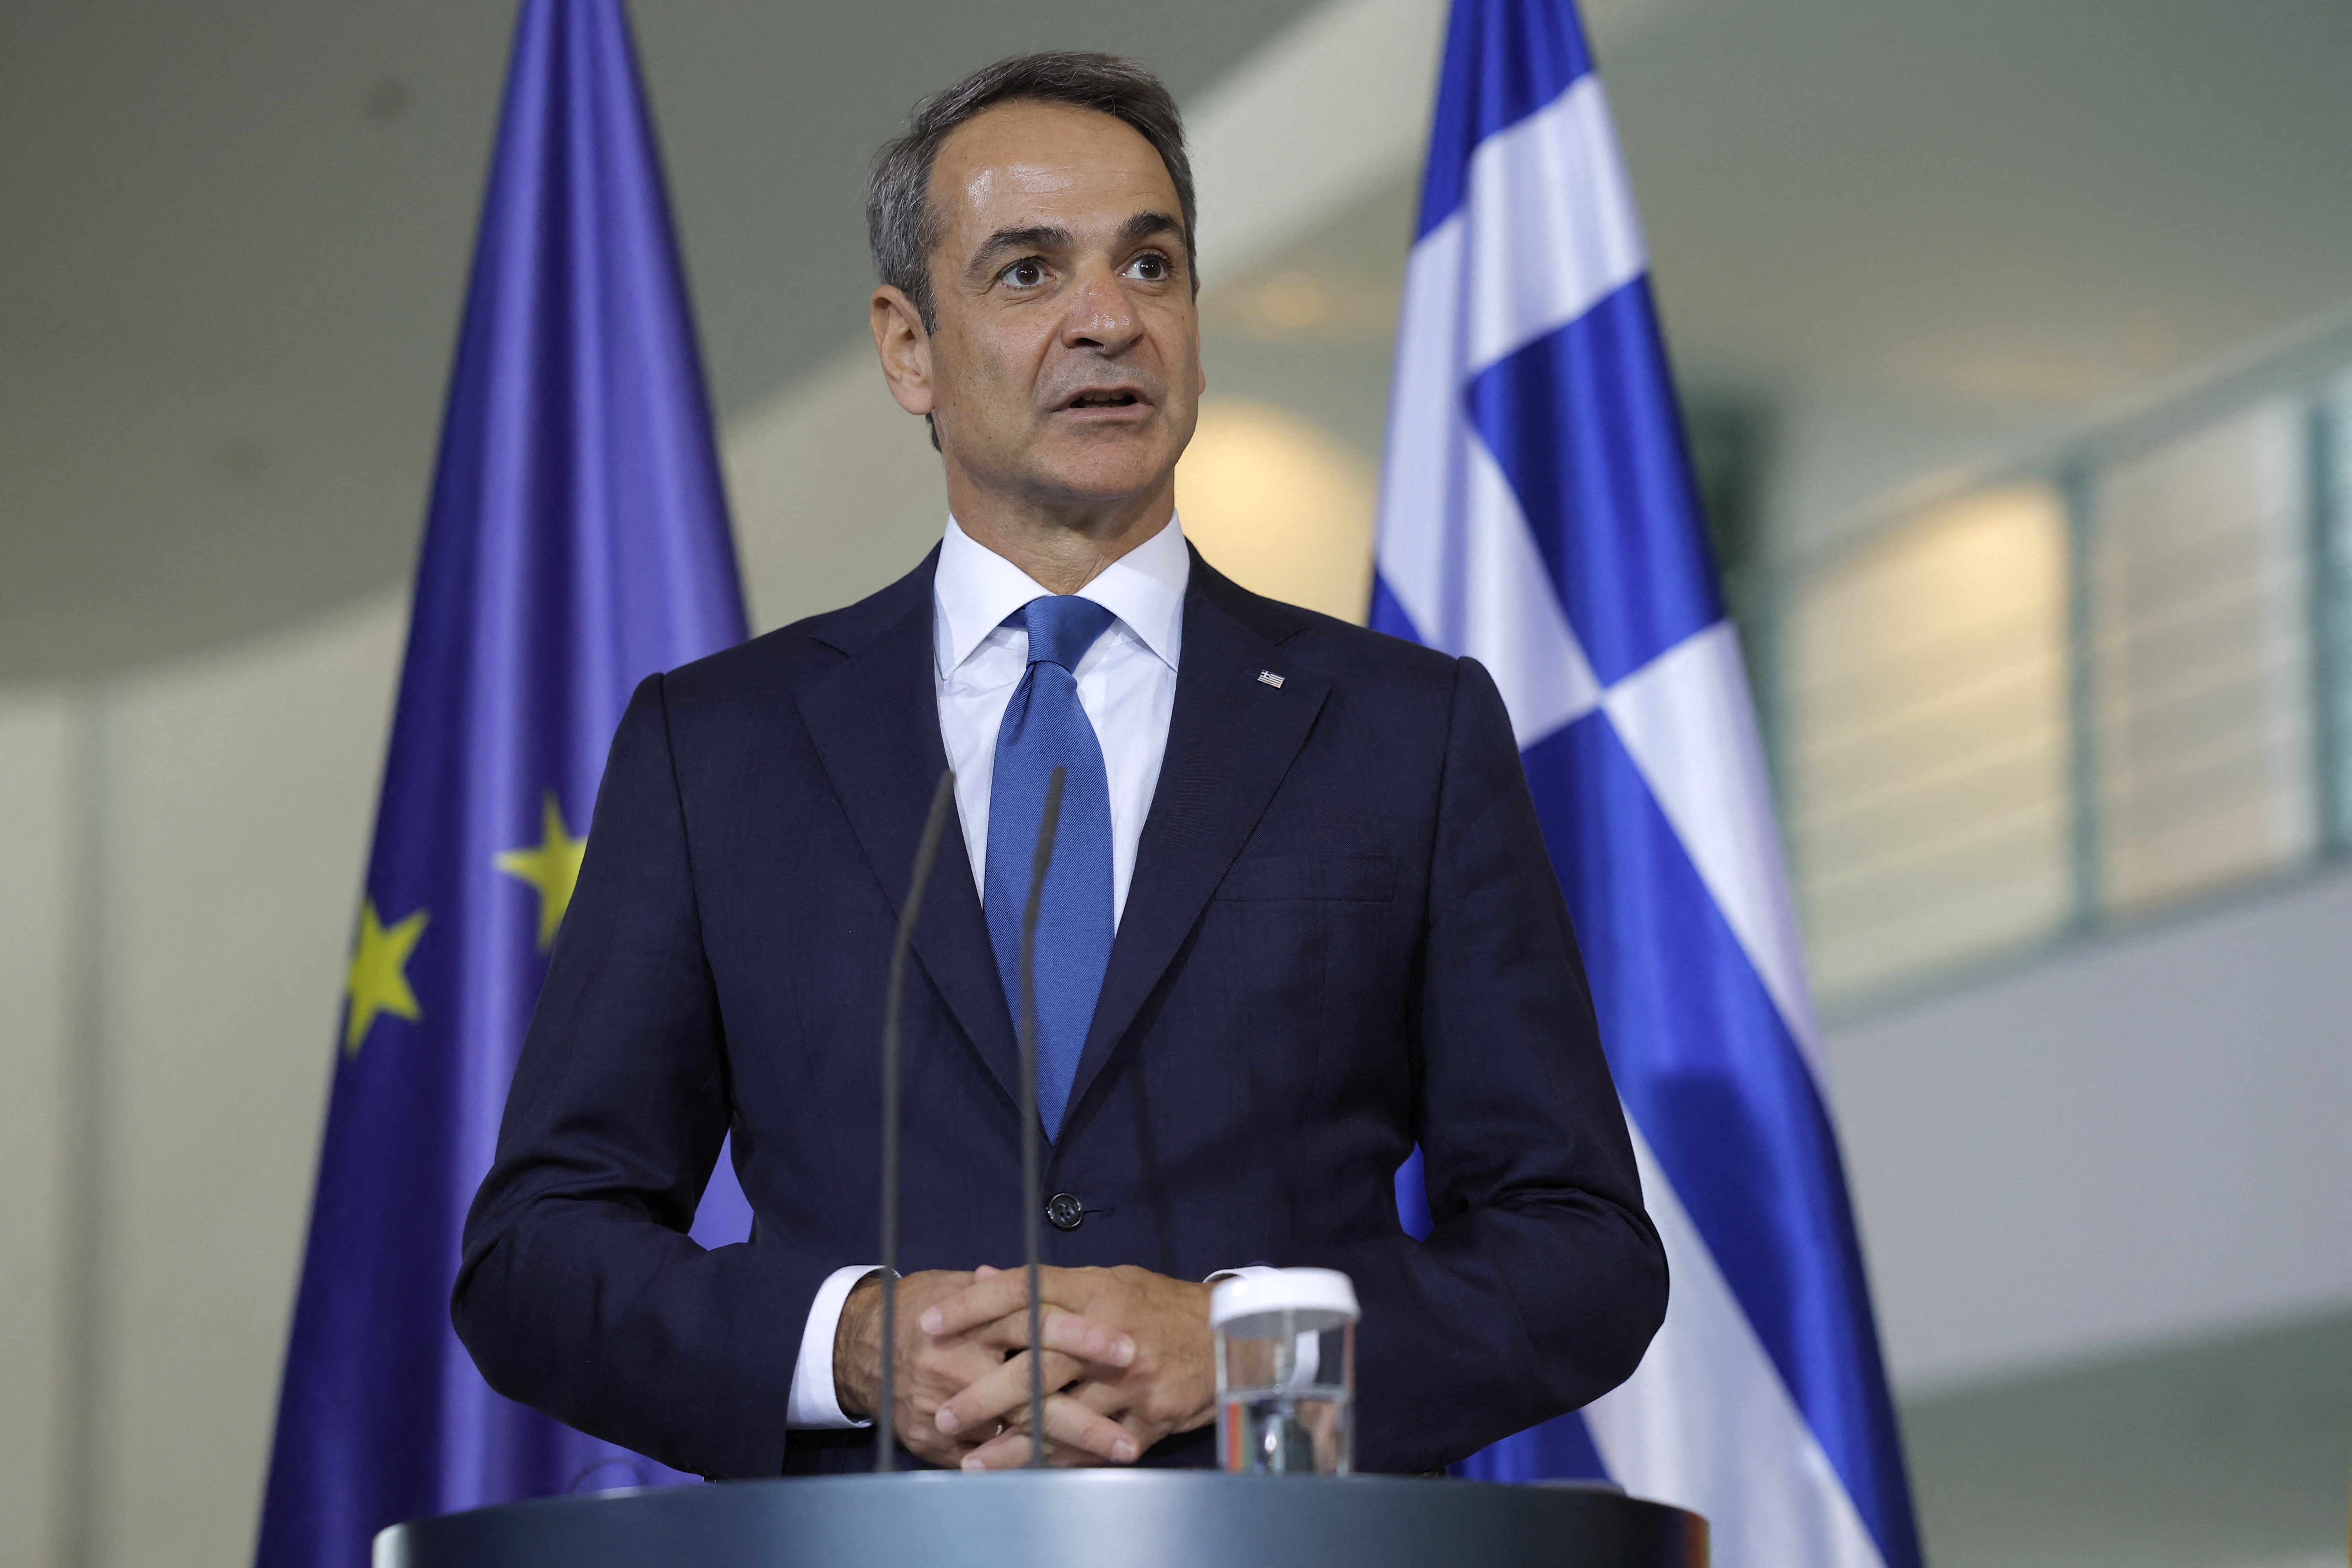 In September, Greek PM Kyriakos Mitsotakis said the government was open to the idea of relocating communities. /Odd Andersen/AFP